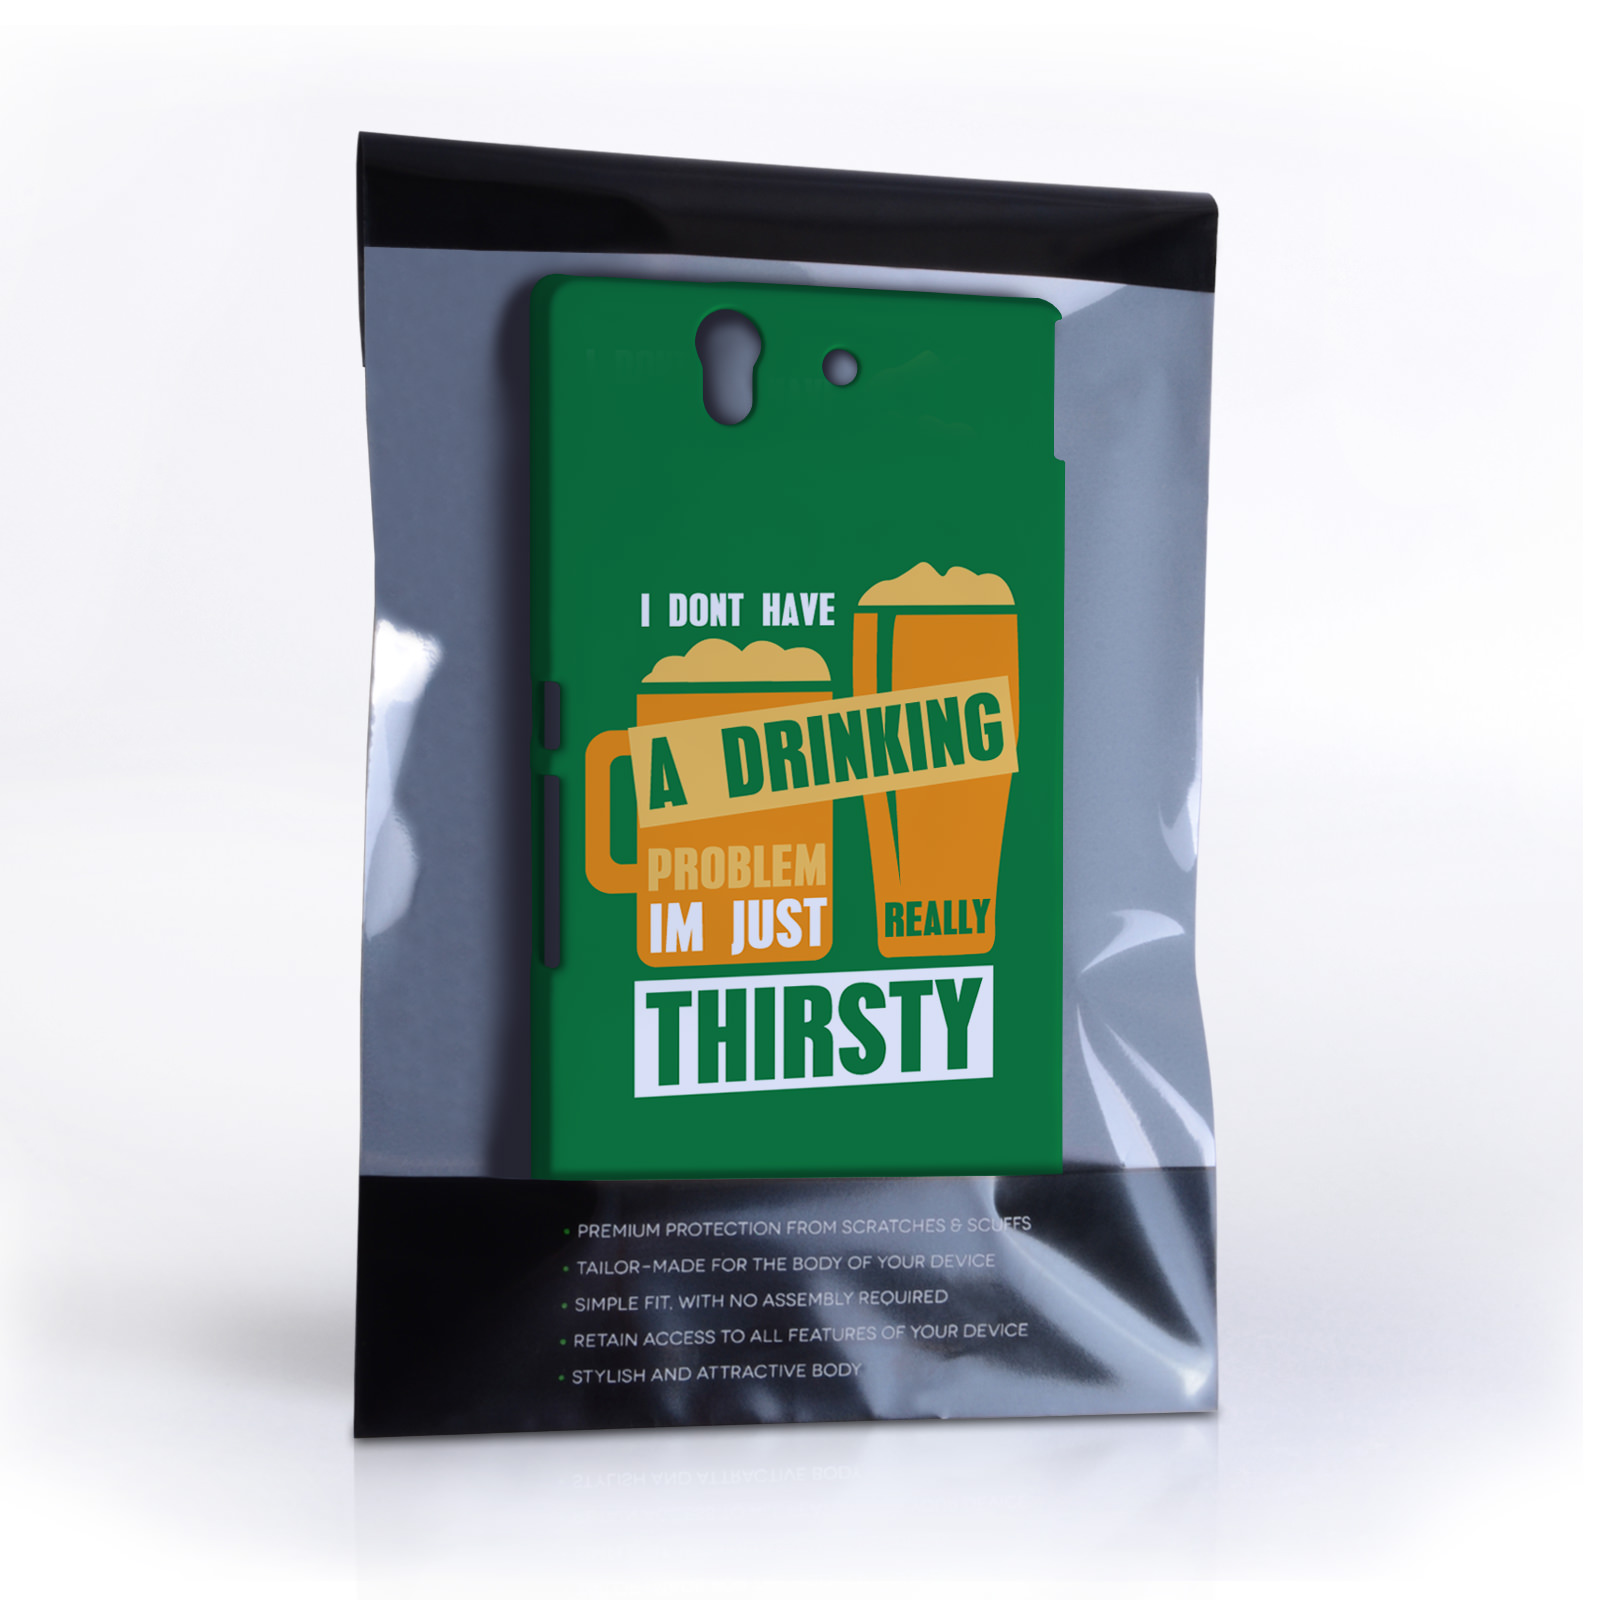 Caseflex Sony Xperia Z ‘Really Thirsty’ Quote Hard Case – Green